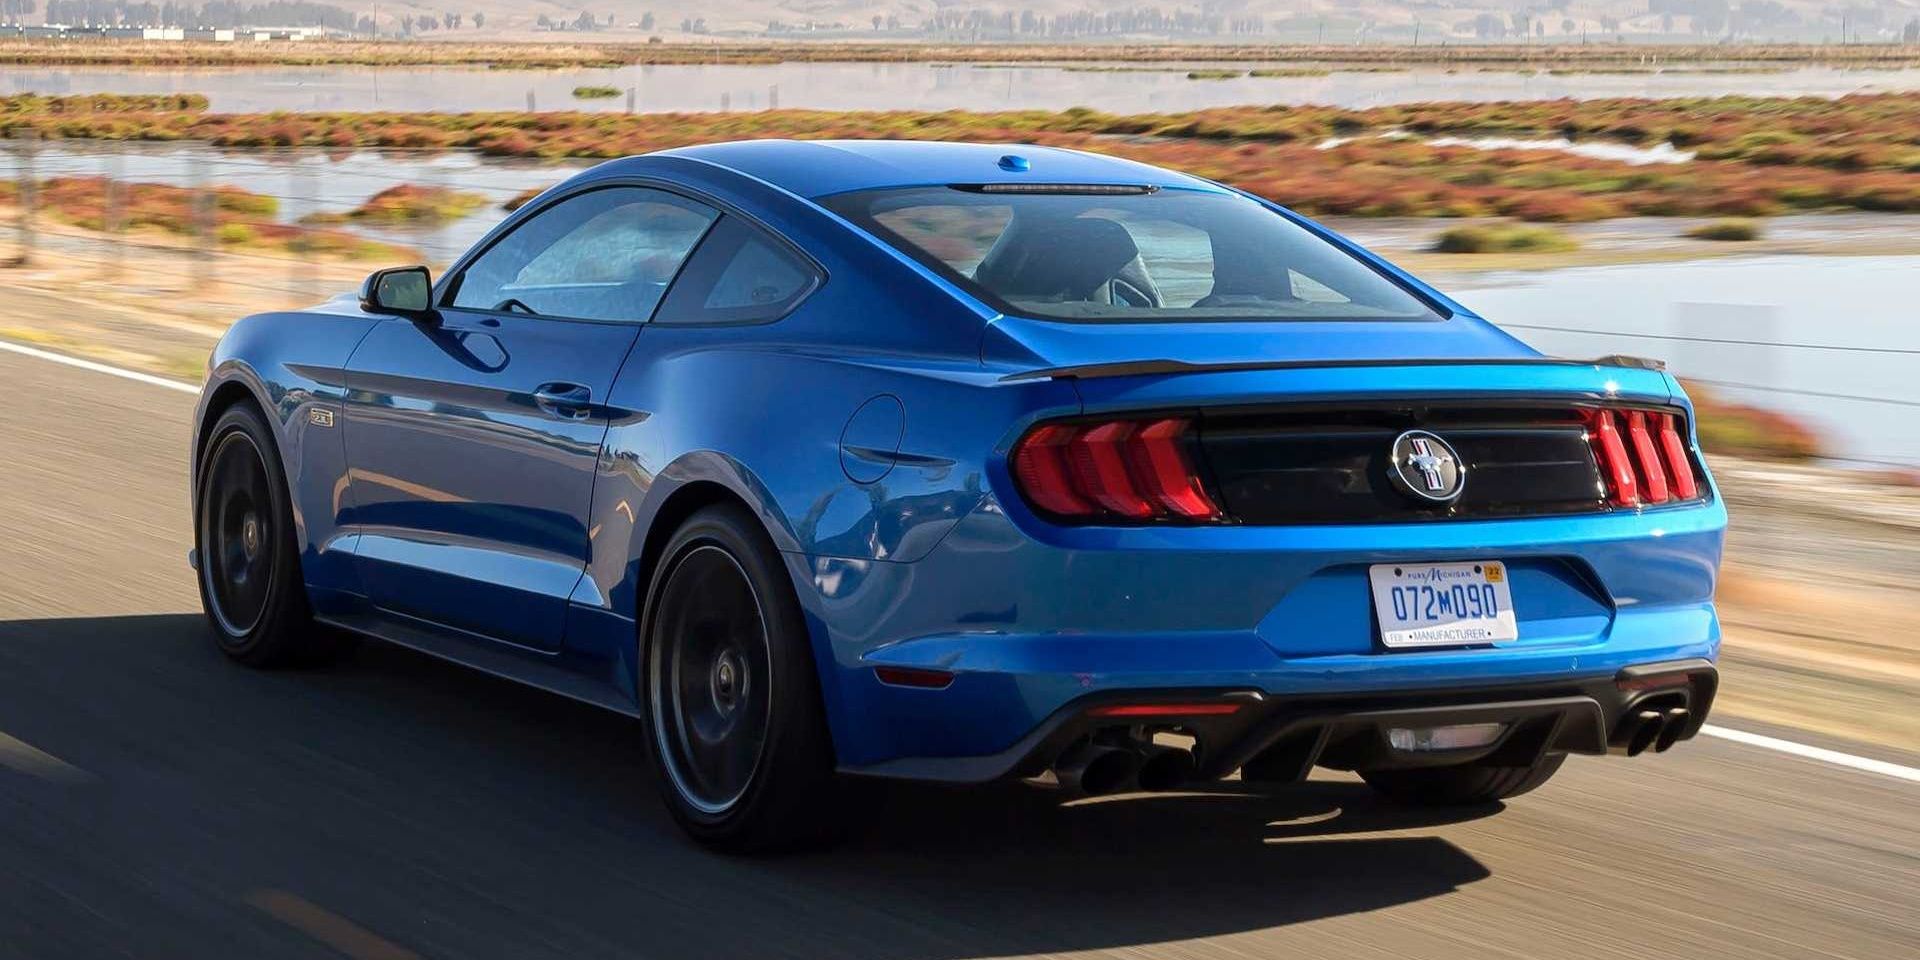 Ranking The Most Powerful Muscle Cars You Can Buy For $30,000